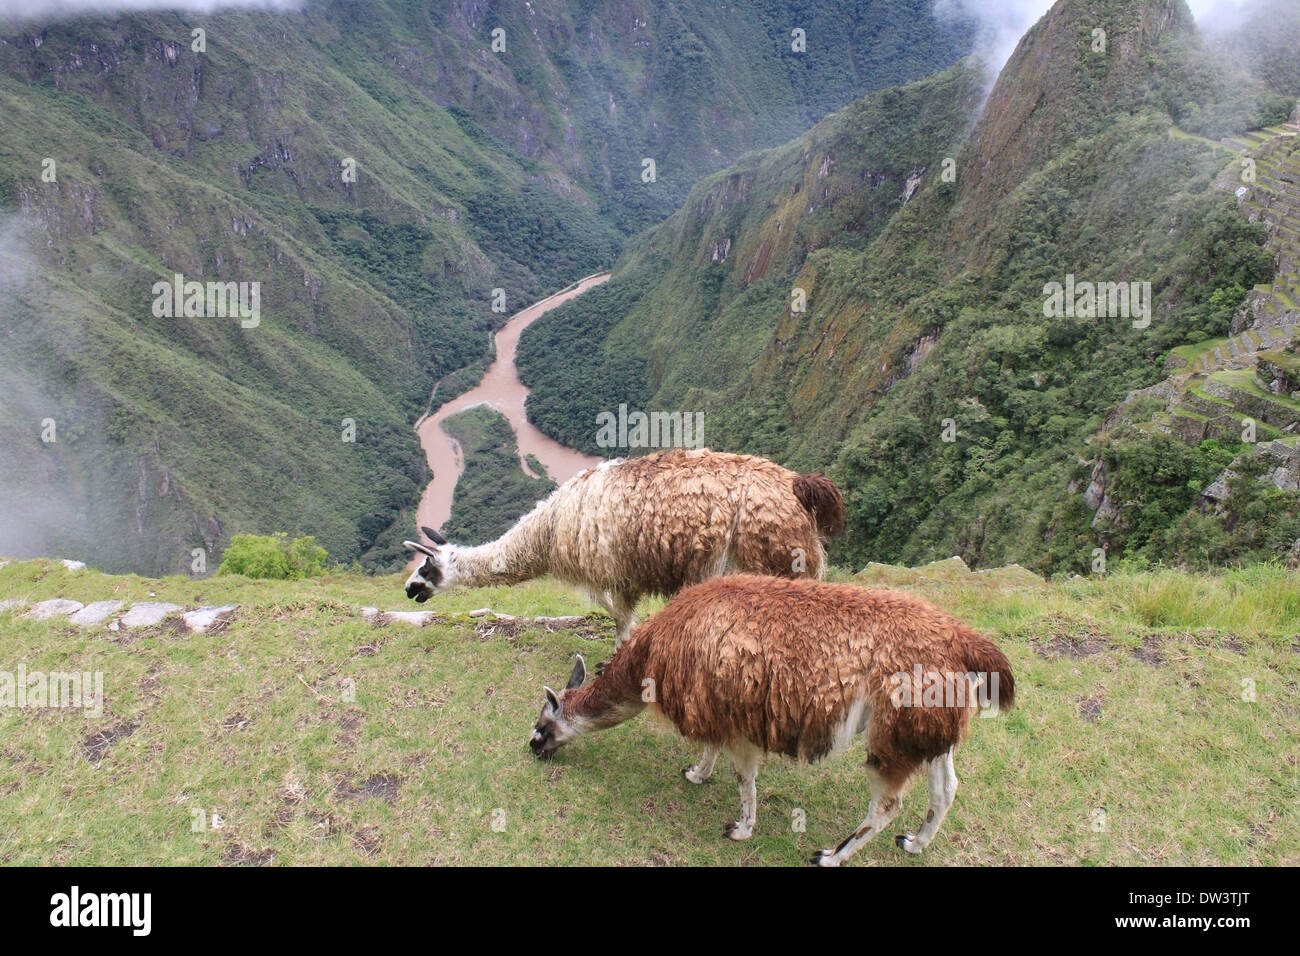 Llamas in Andes on ancient terrace overlooking river in the valley Stock Photo